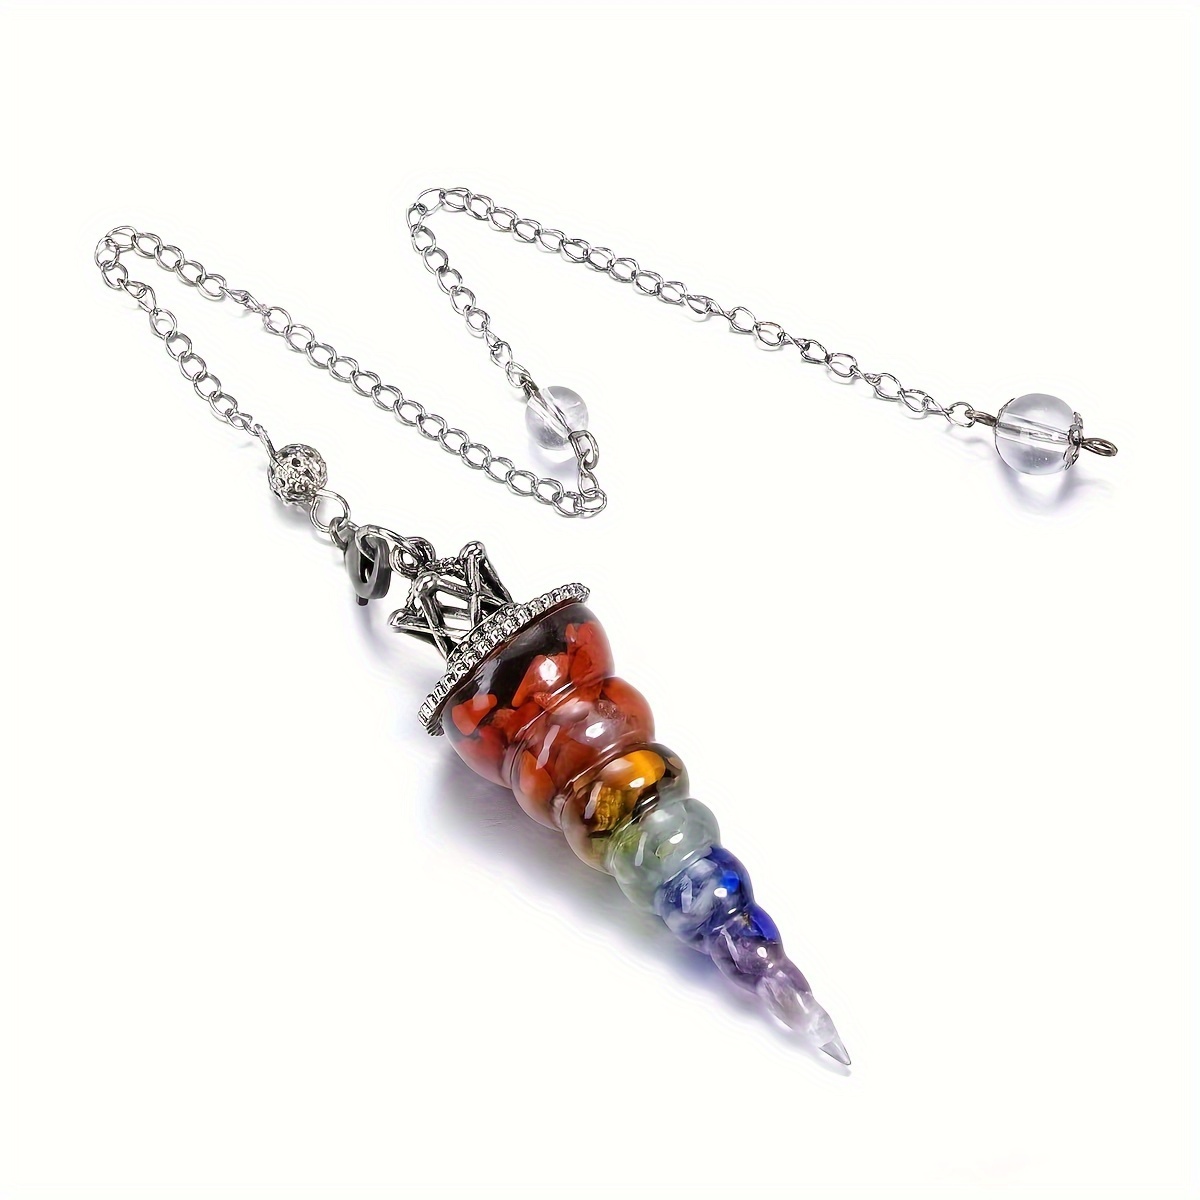 Witchcraft Pendulum Necklace, Wicca Crystal Pendant